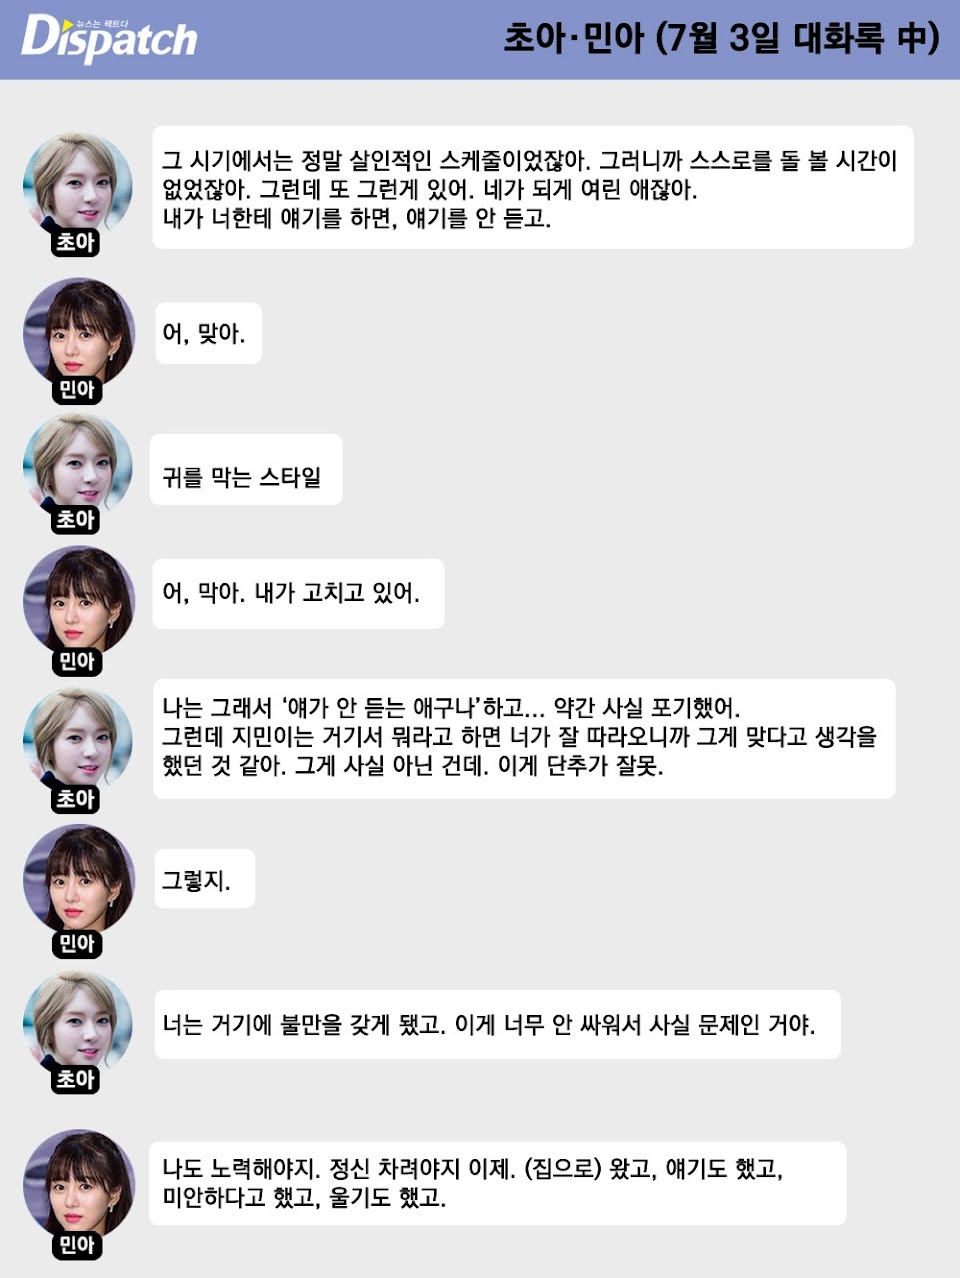  Dispatch Releases Text Messages And Transcripts Between Kwon Mina And Shin Jimin